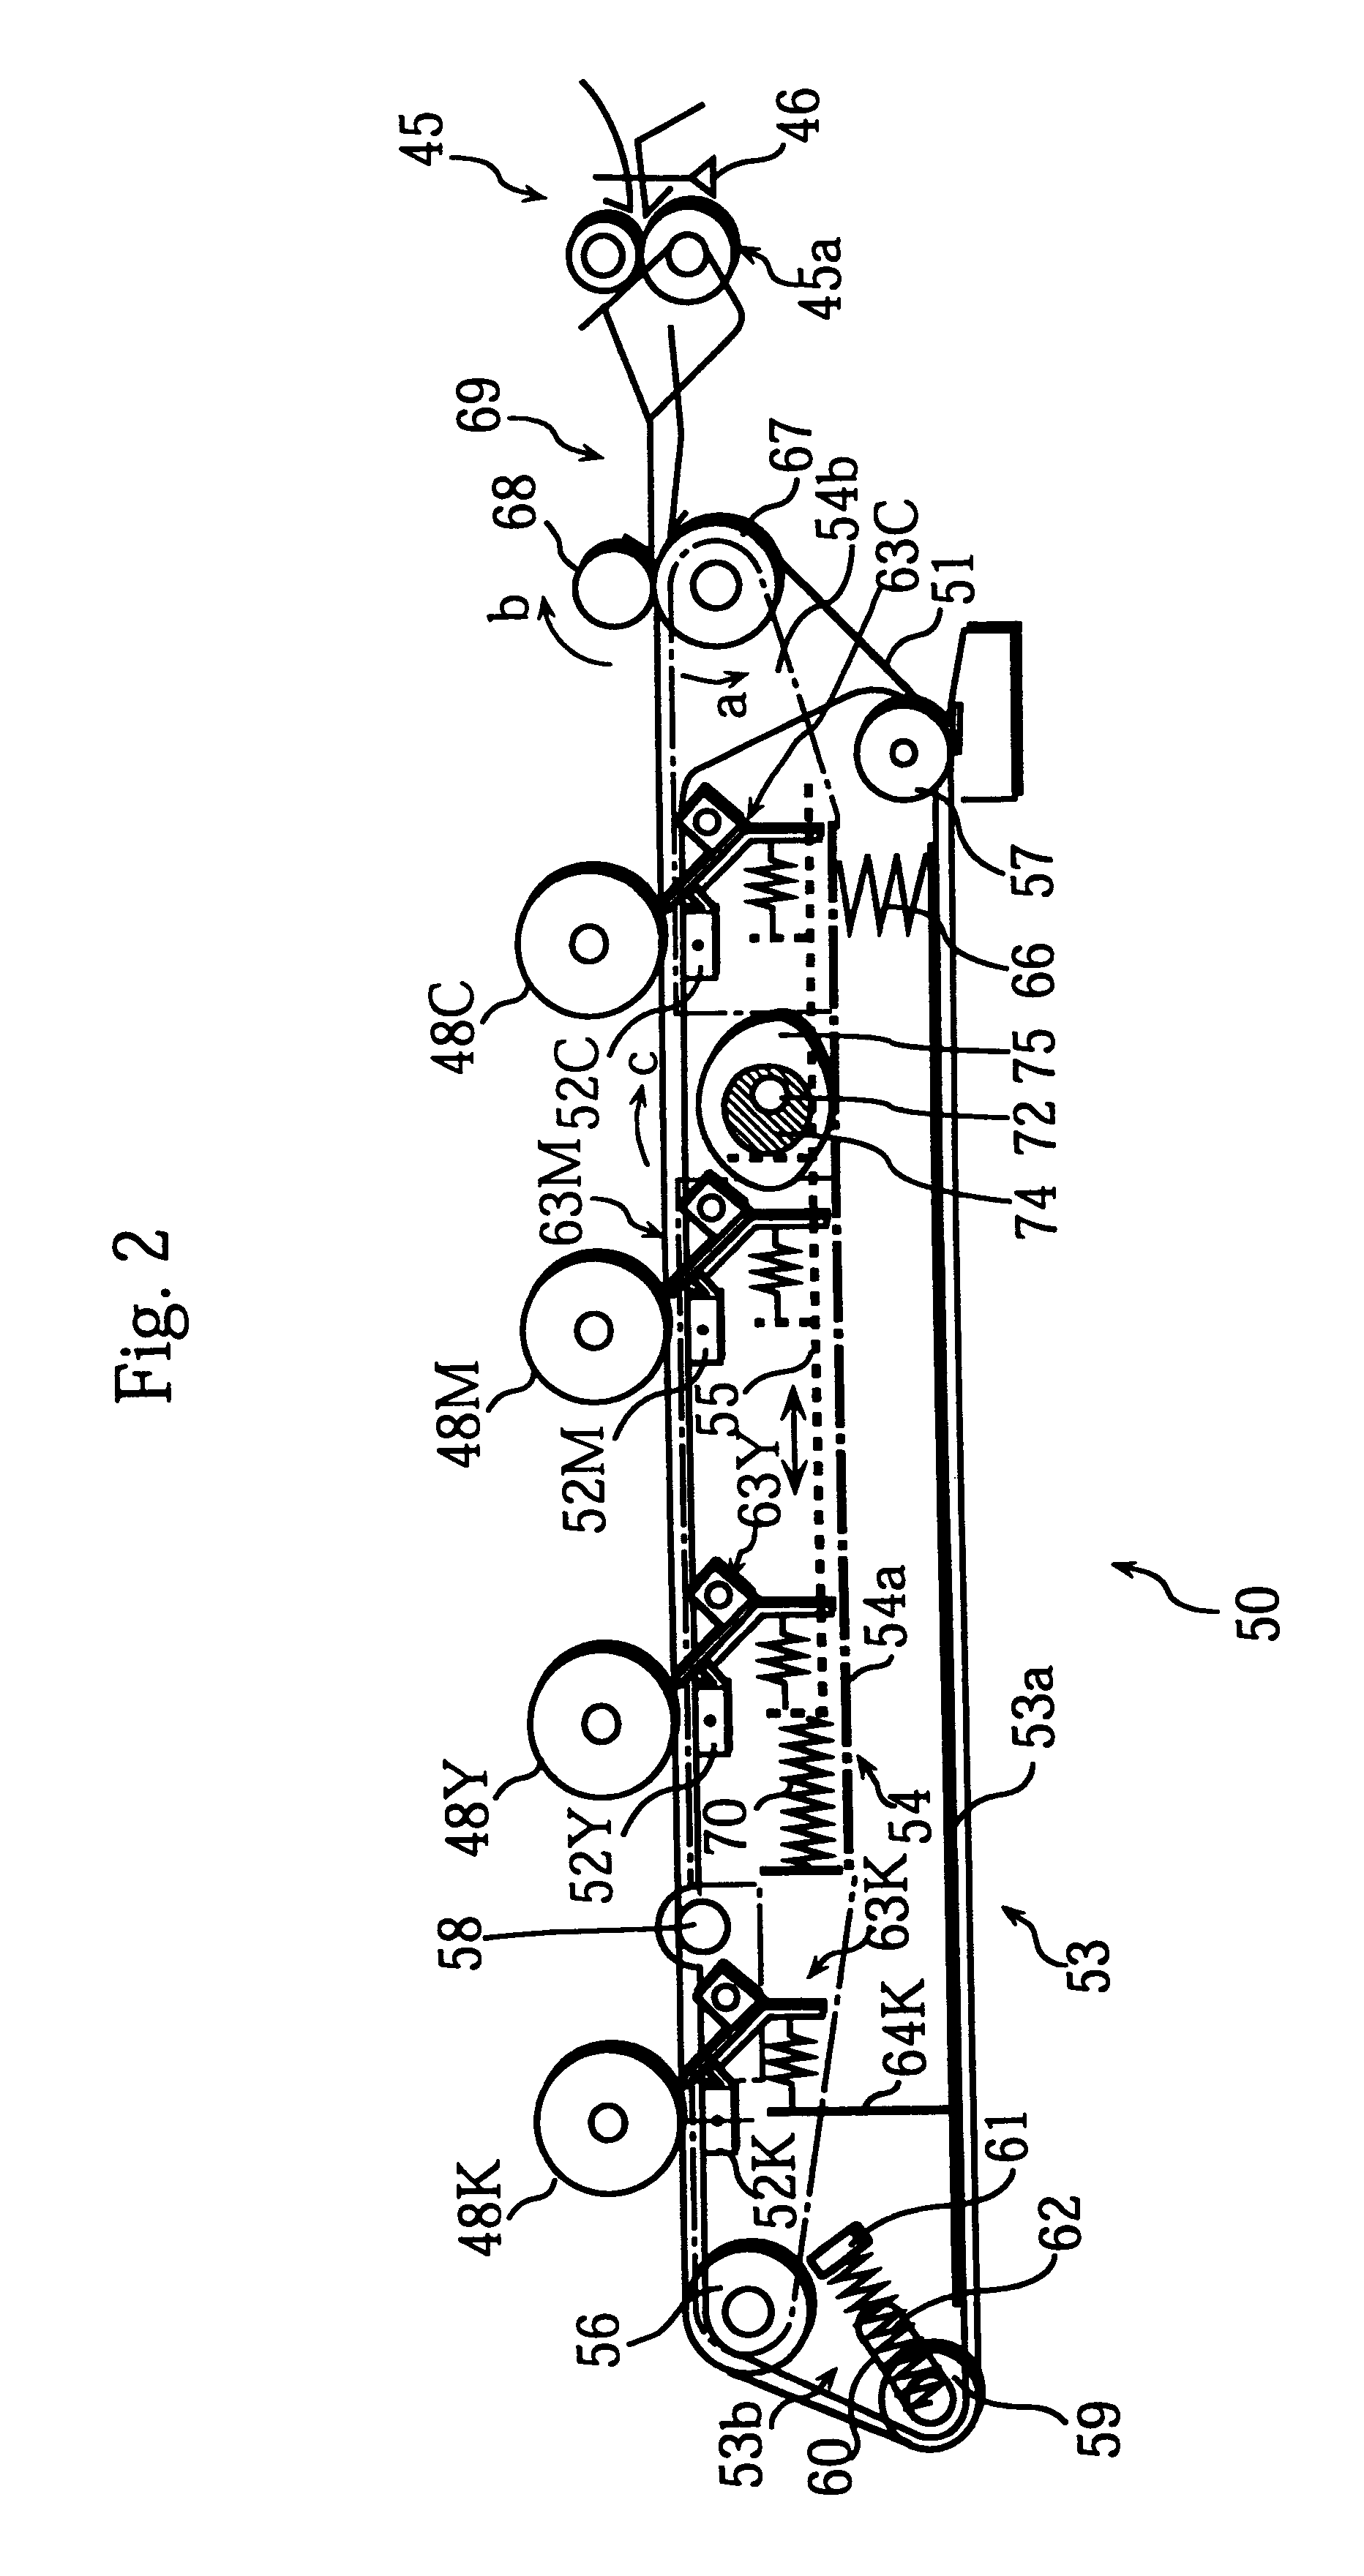 Image forming apparatus provided with a plurality of image holding components